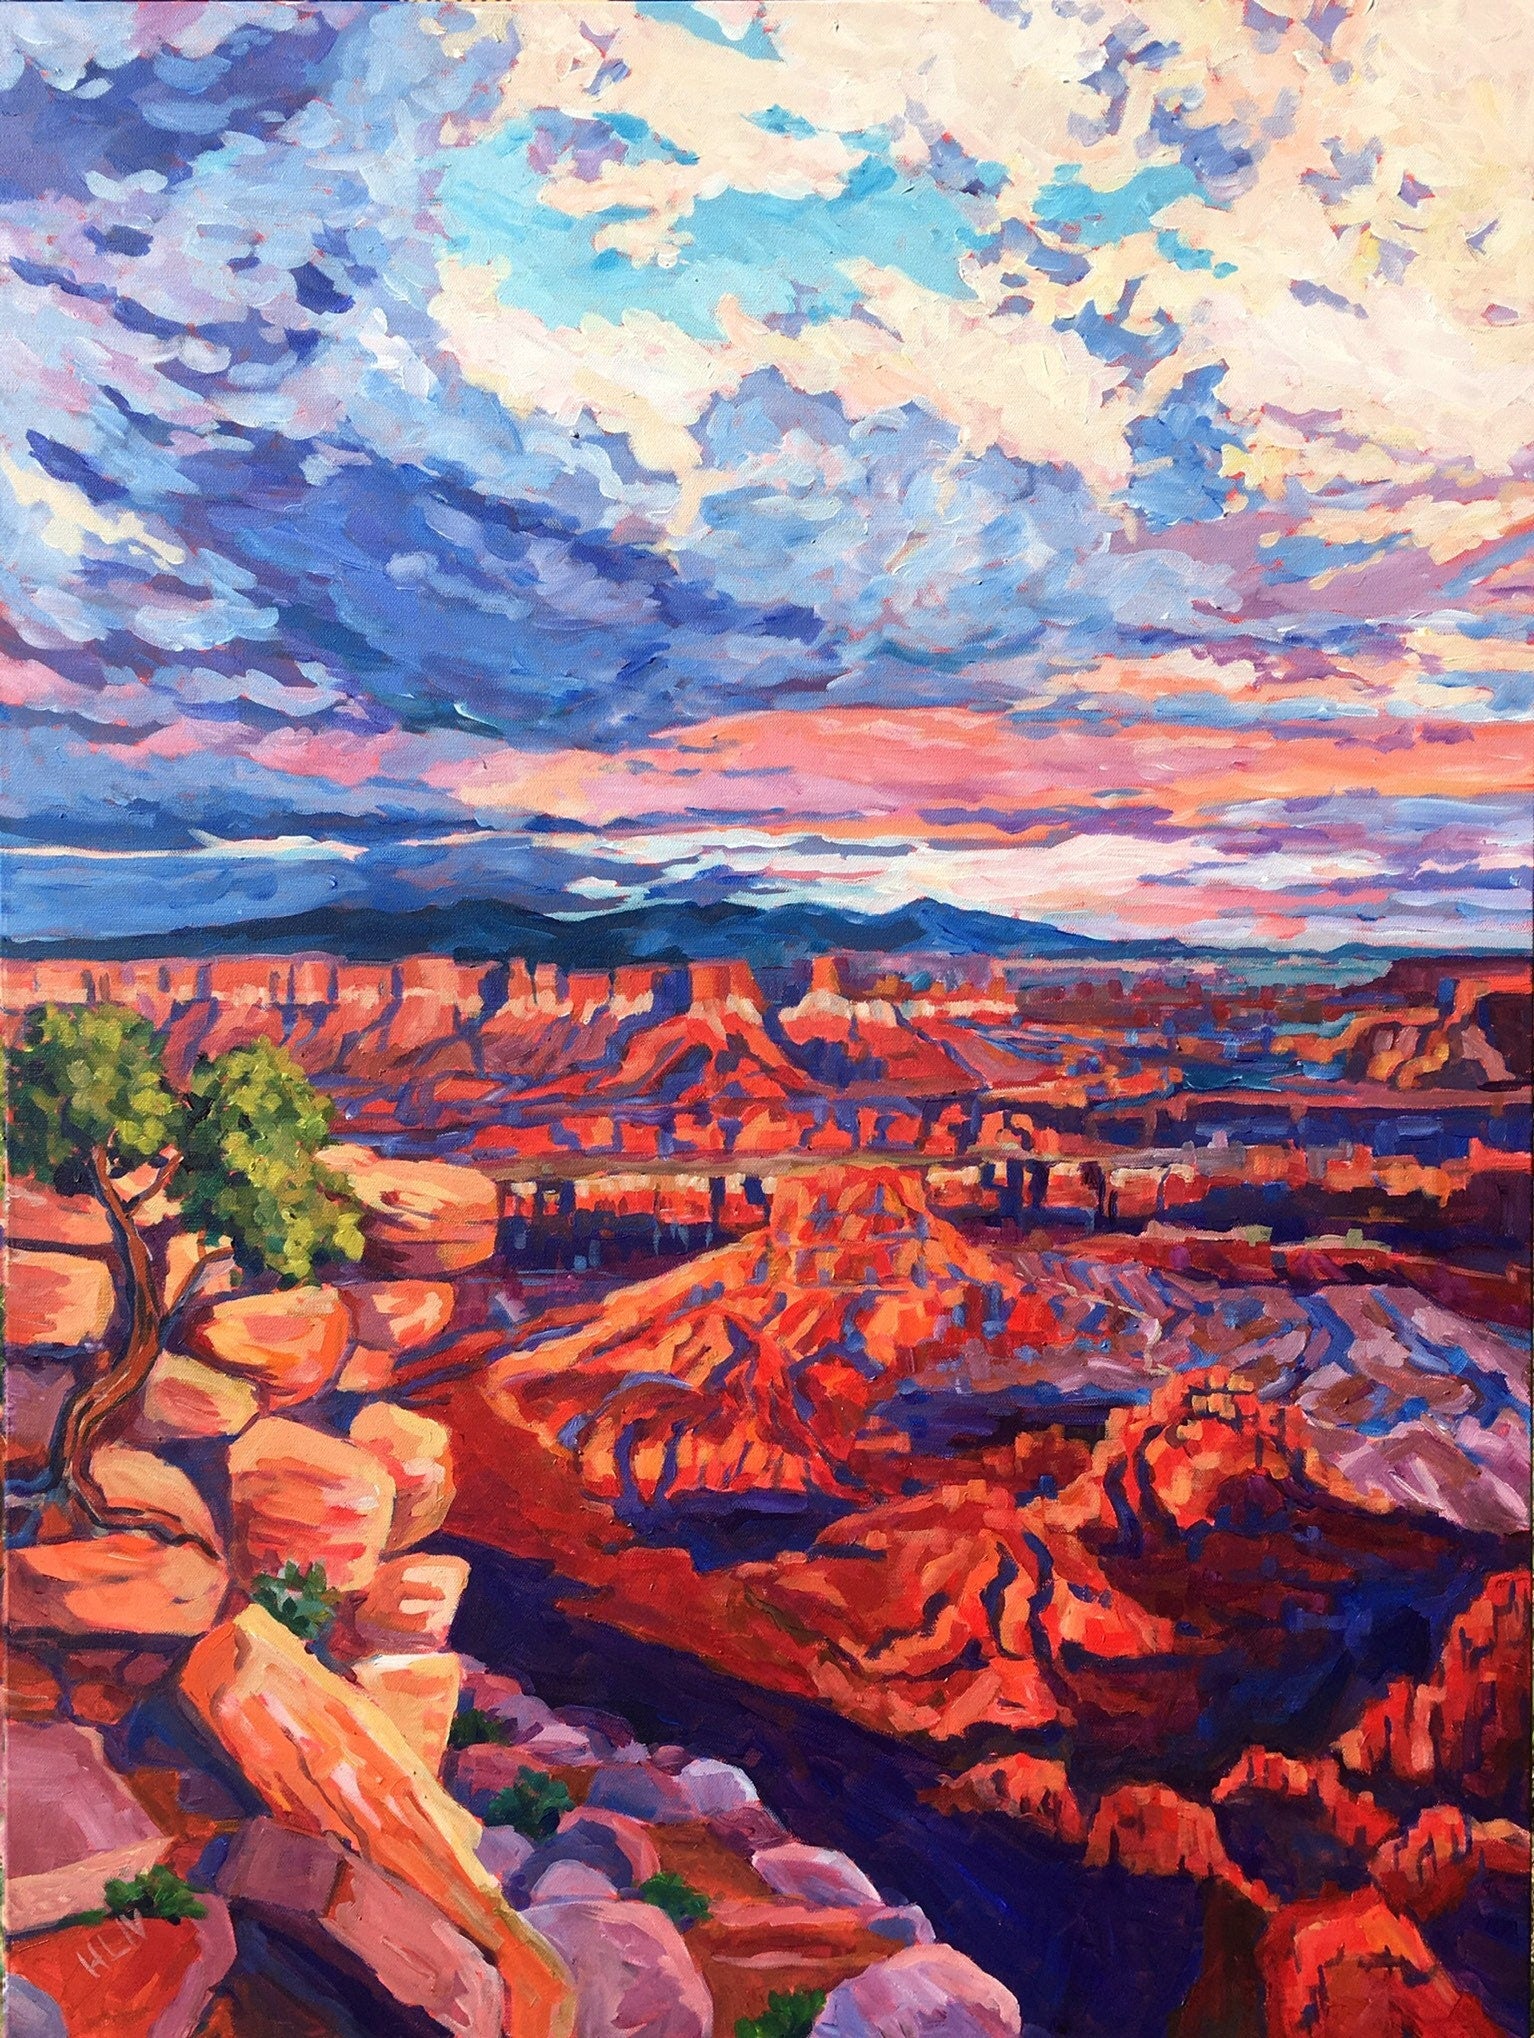 Original vibrant  impressionistic painting near Canyonlands State Park in Utah, Dead Horse point state park with dramatic sky